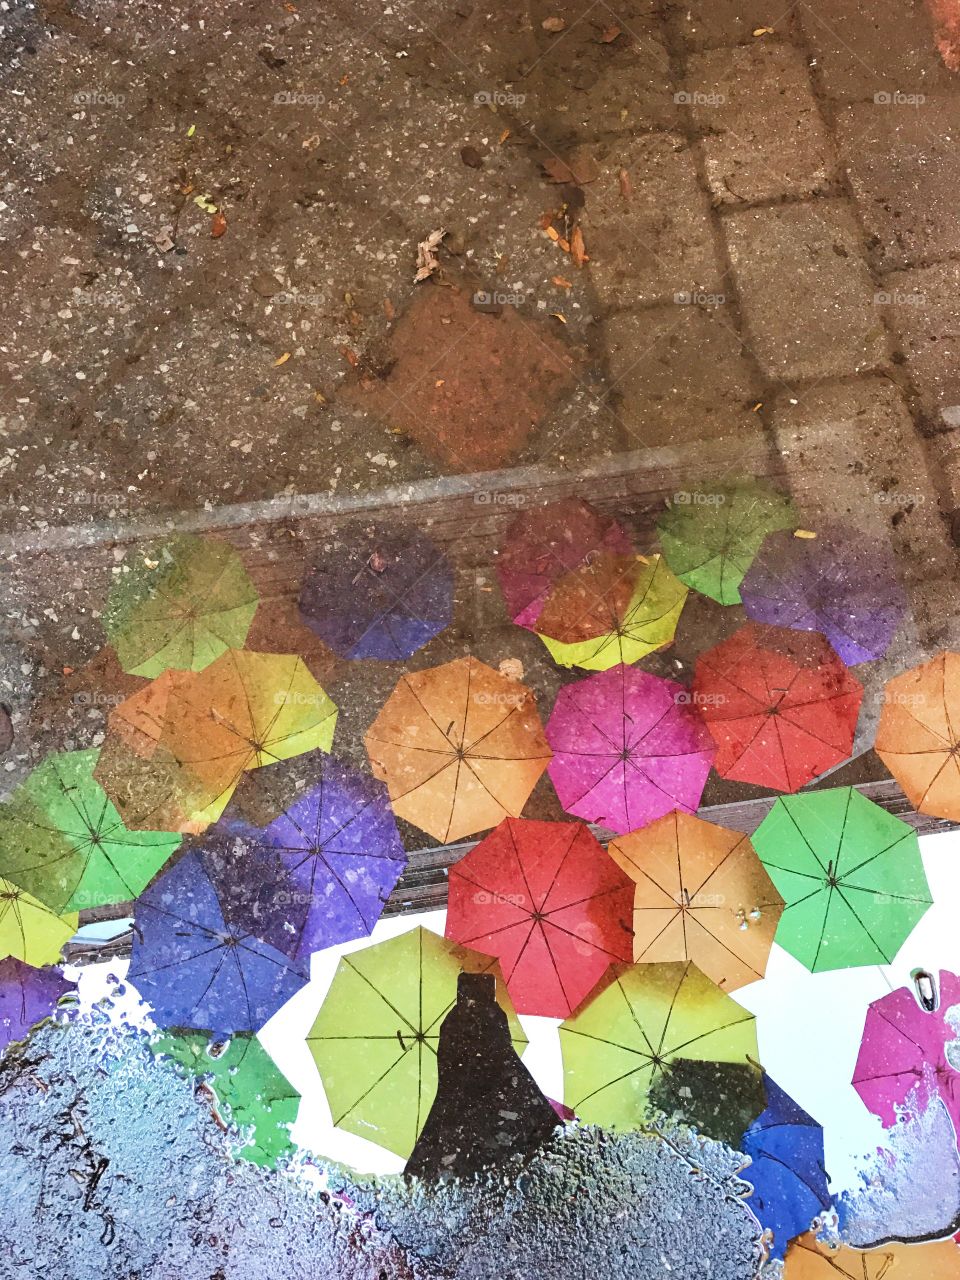 Reflection of umbrellas in a puddle 